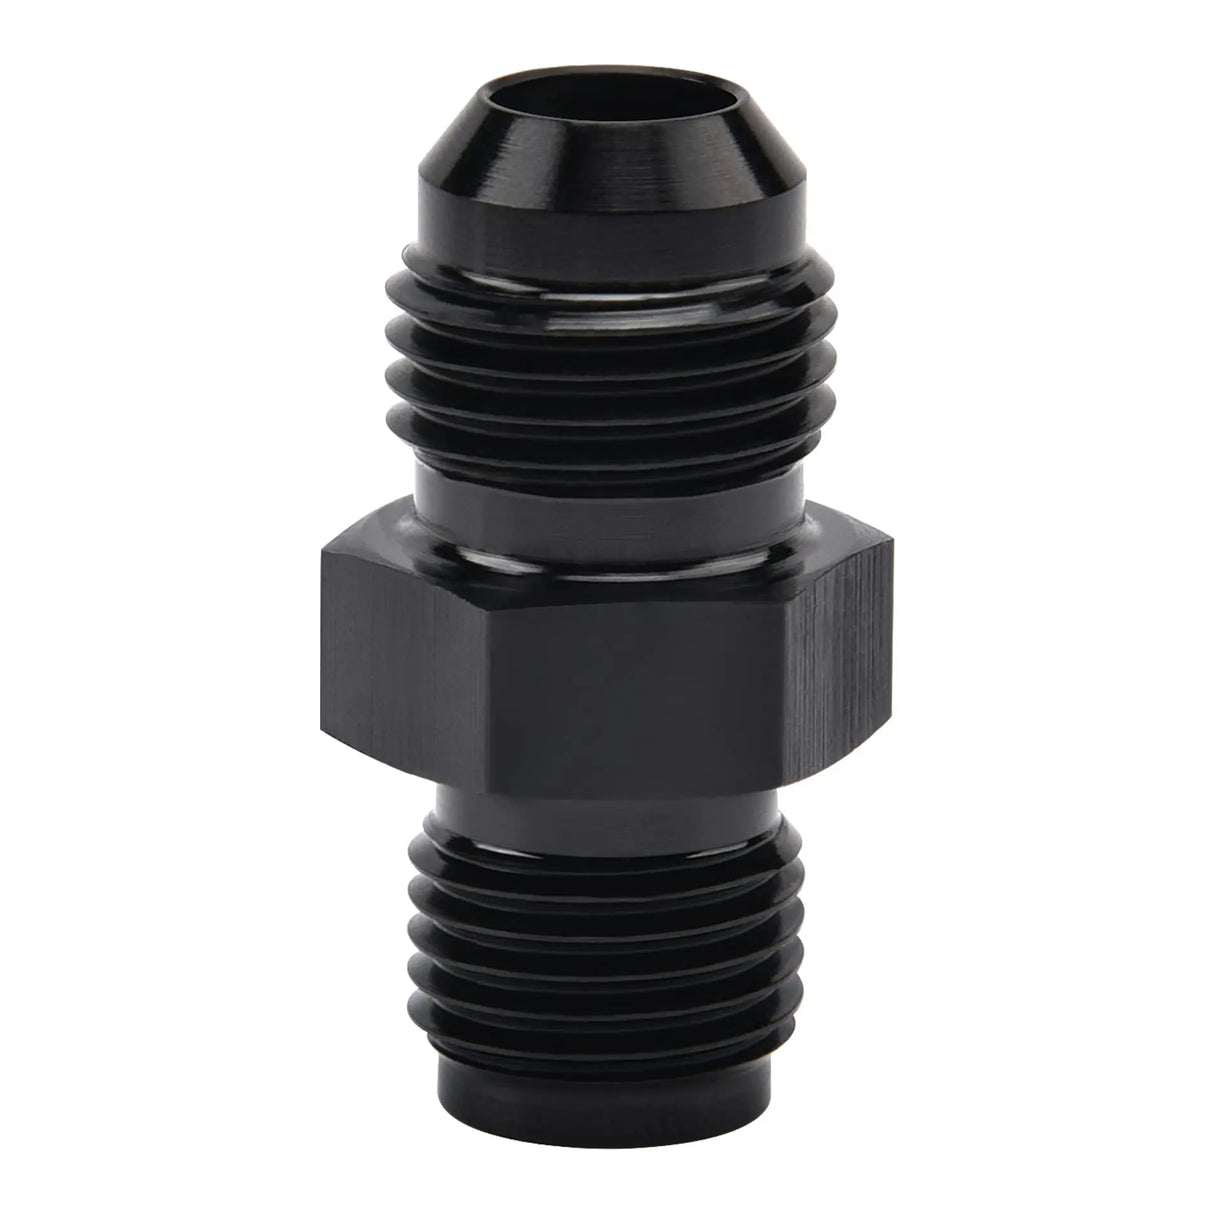 EVIL ENERGY 6AN Male to 1/2 x 20 Inverted Flare Thread Adapter